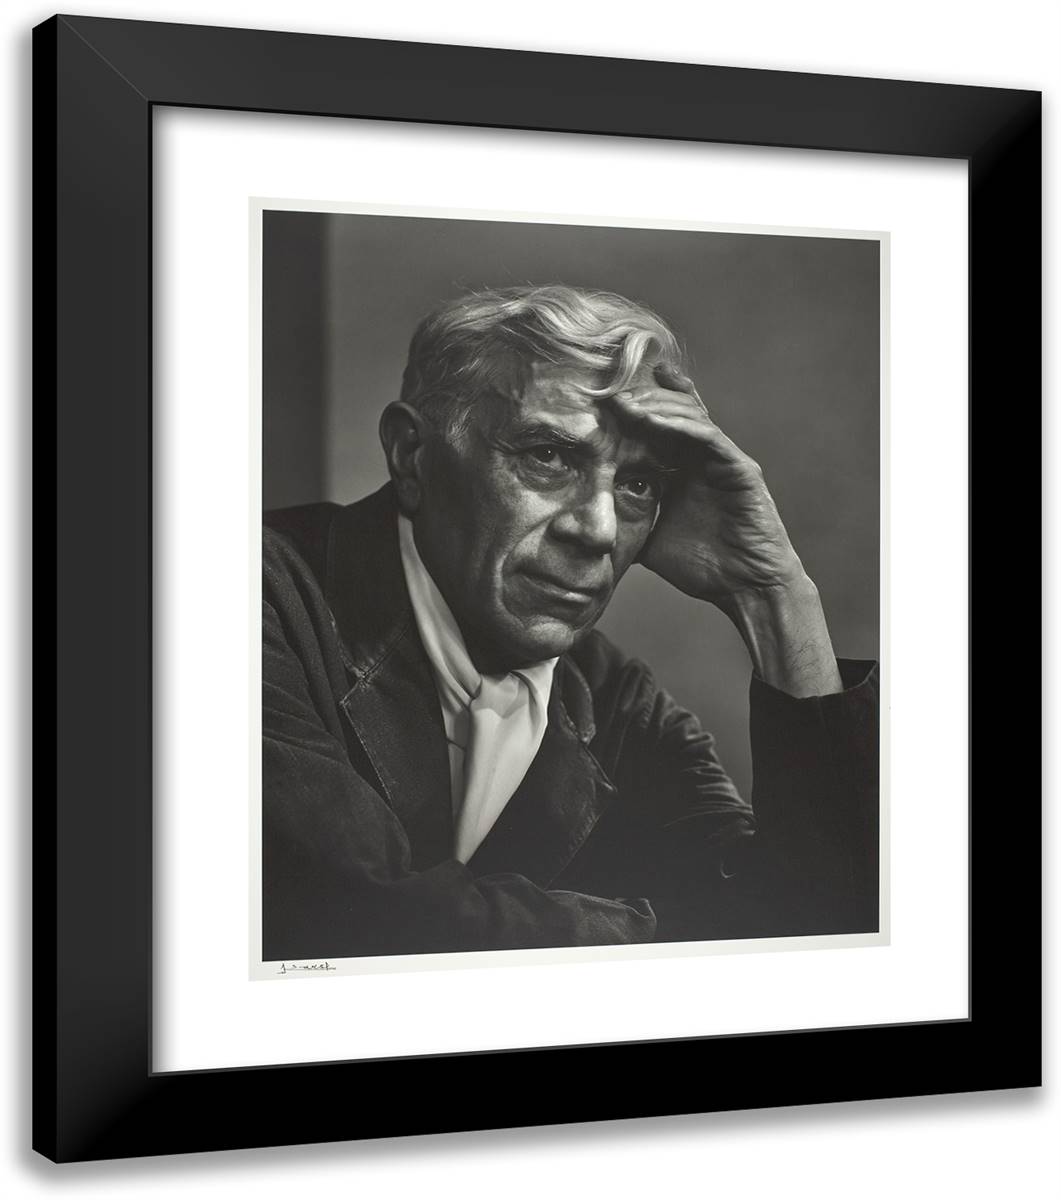 Georges Braque 20x23 Black Modern Wood Framed Art Print Poster by Karsh, Yousuf